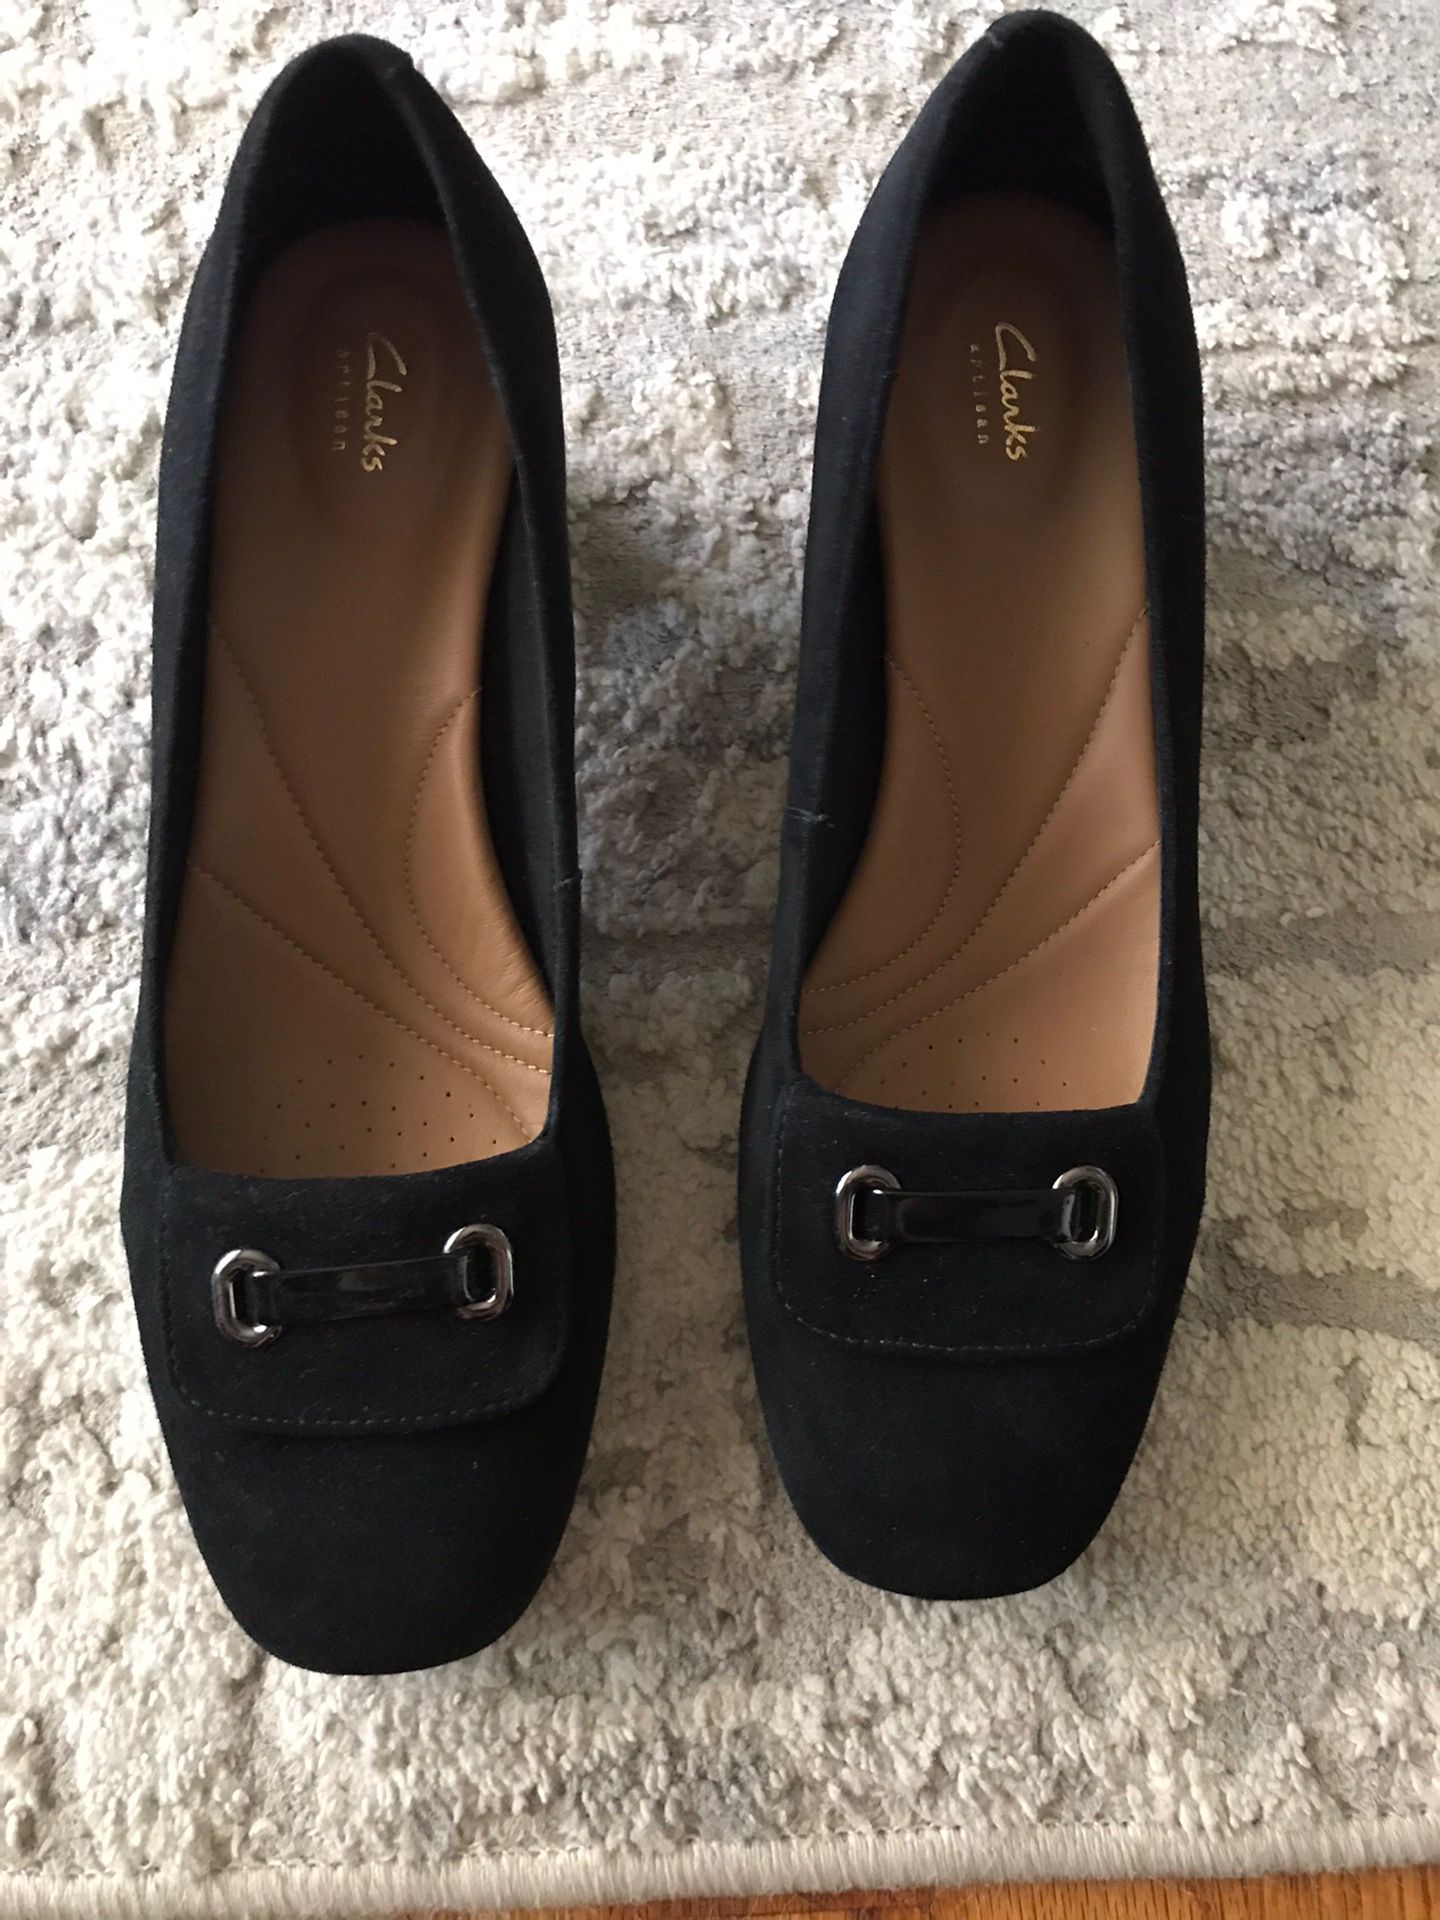 Clarks Black Suede Women's Shoes Size 8.5 for Sale in City, KS - OfferUp